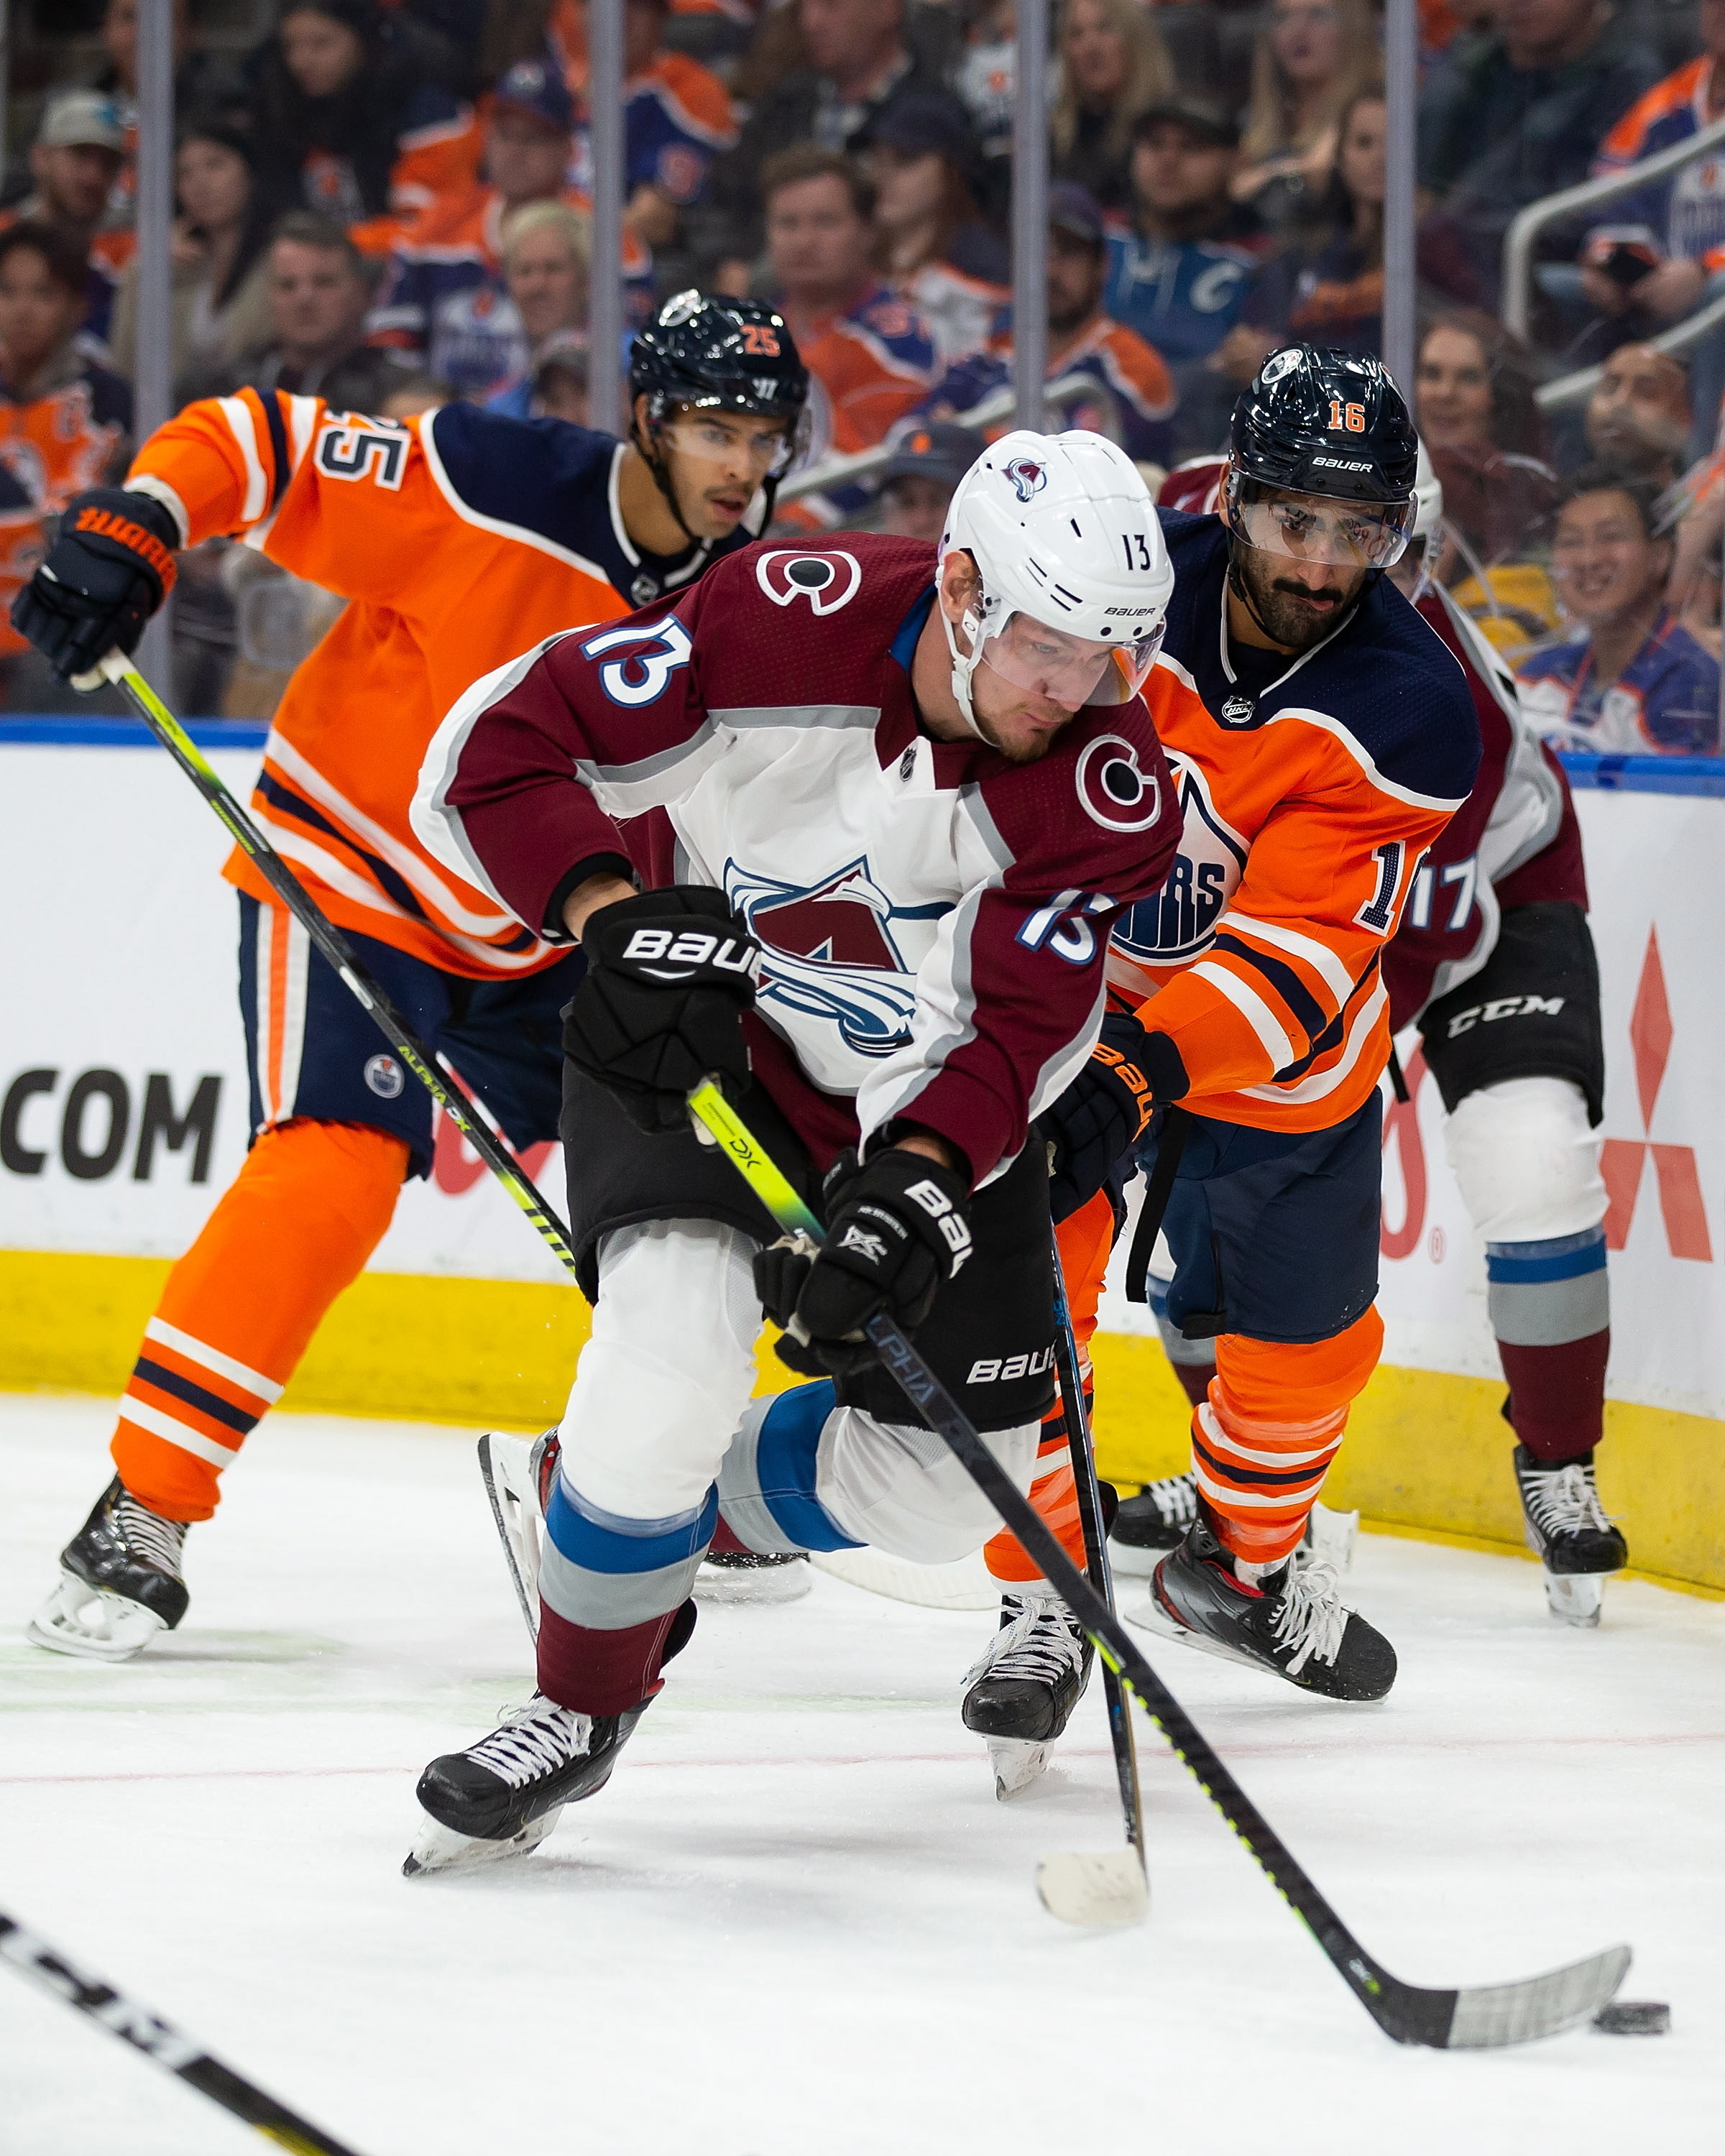 McDavid hat trick leads Oilers past Avalanche 6-2